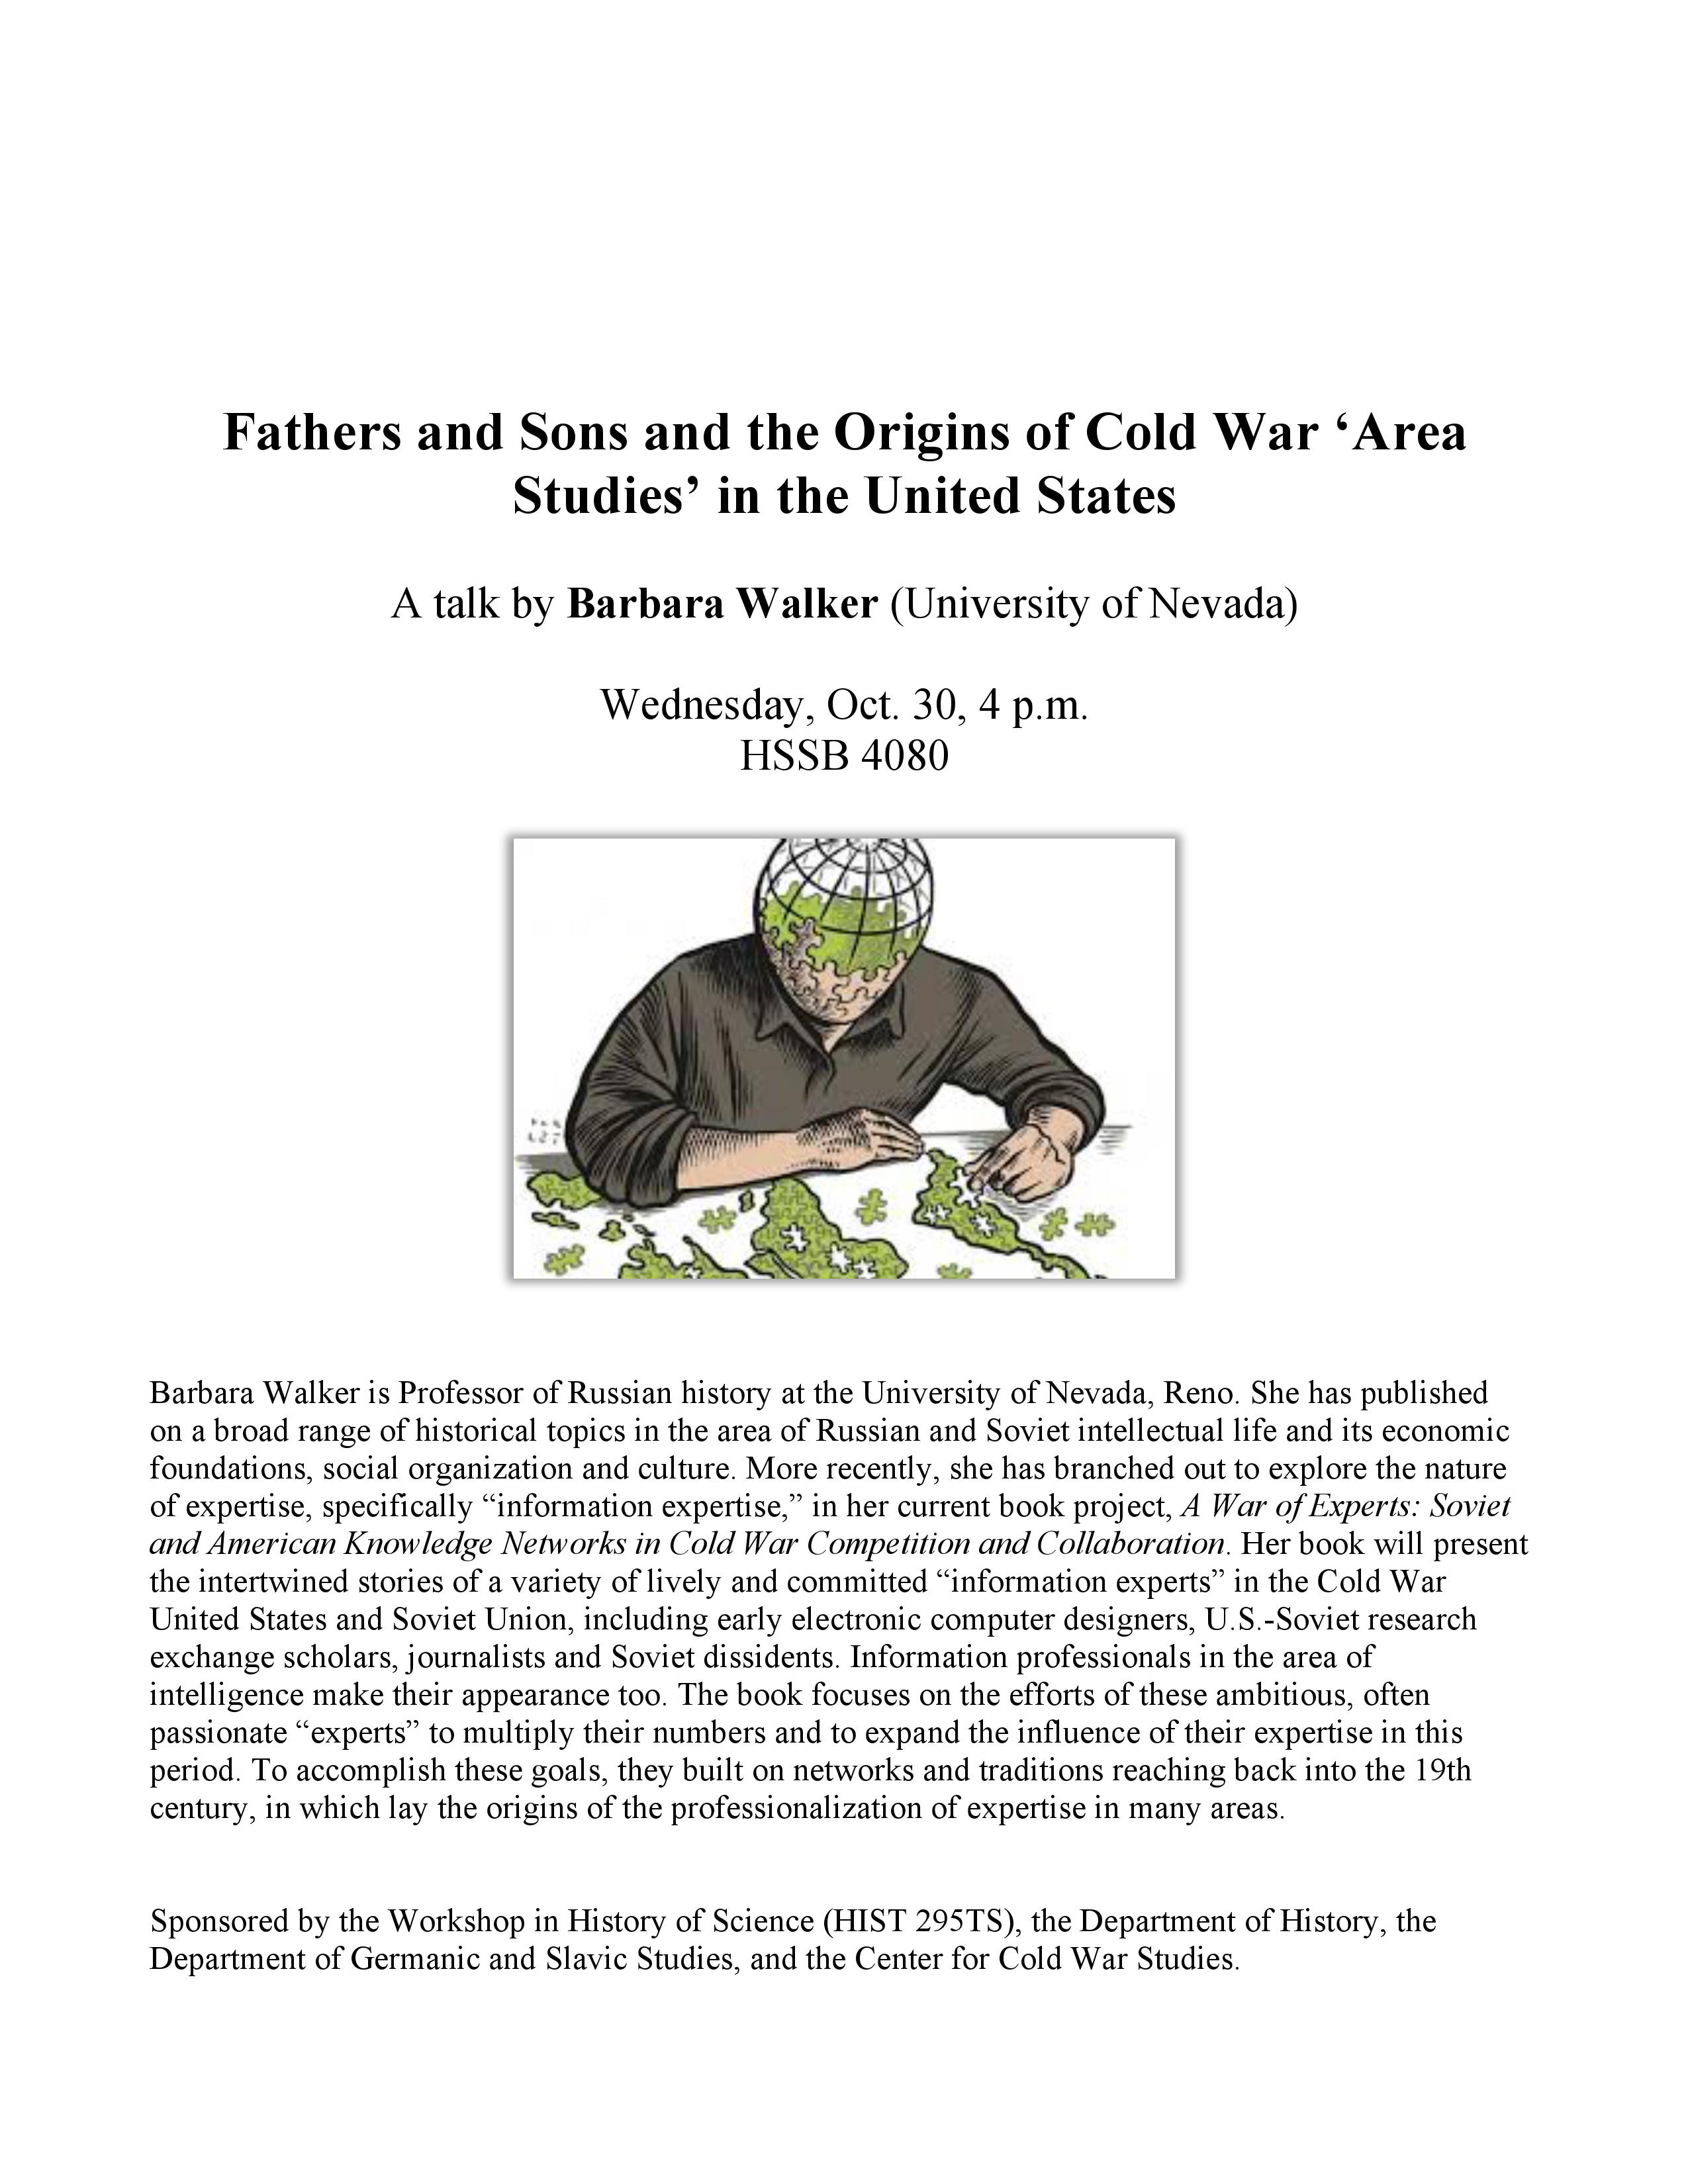 flyer for Barbara Walker, "Fathers and Sons and the Origins of Cold War ‘Area Studies’ in the United States"